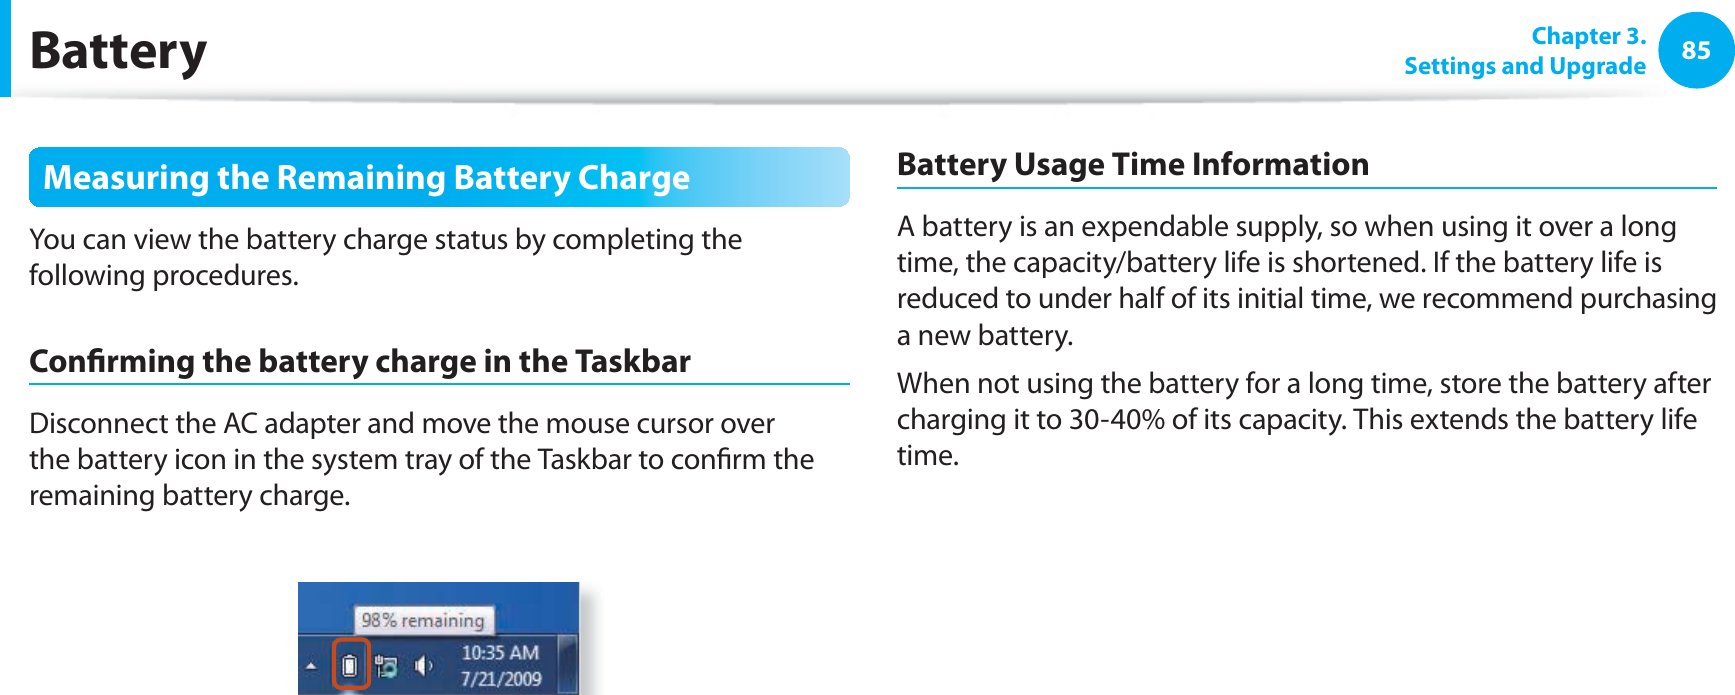 85 Chapter  3.Settings and UpgradeBatteryMeasuring the Remaining Battery ChargeYou can view the battery charge status by completing the following procedures.Con rming the battery charge in the TaskbarDisconnect the AC adapter and move the mouse cursor over the battery icon in the system tray of the Taskbar to con rm the remaining battery charge.Battery Usage Time InformationA battery is an expendable supply, so when using it over a long time, the capacity/battery life is shortened. If the battery life is reduced to under half of its initial time, we recommend purchasing a new battery.When not using the battery for a long time, store the battery after charging it to 30-40% of its capacity. This extends the battery life time.